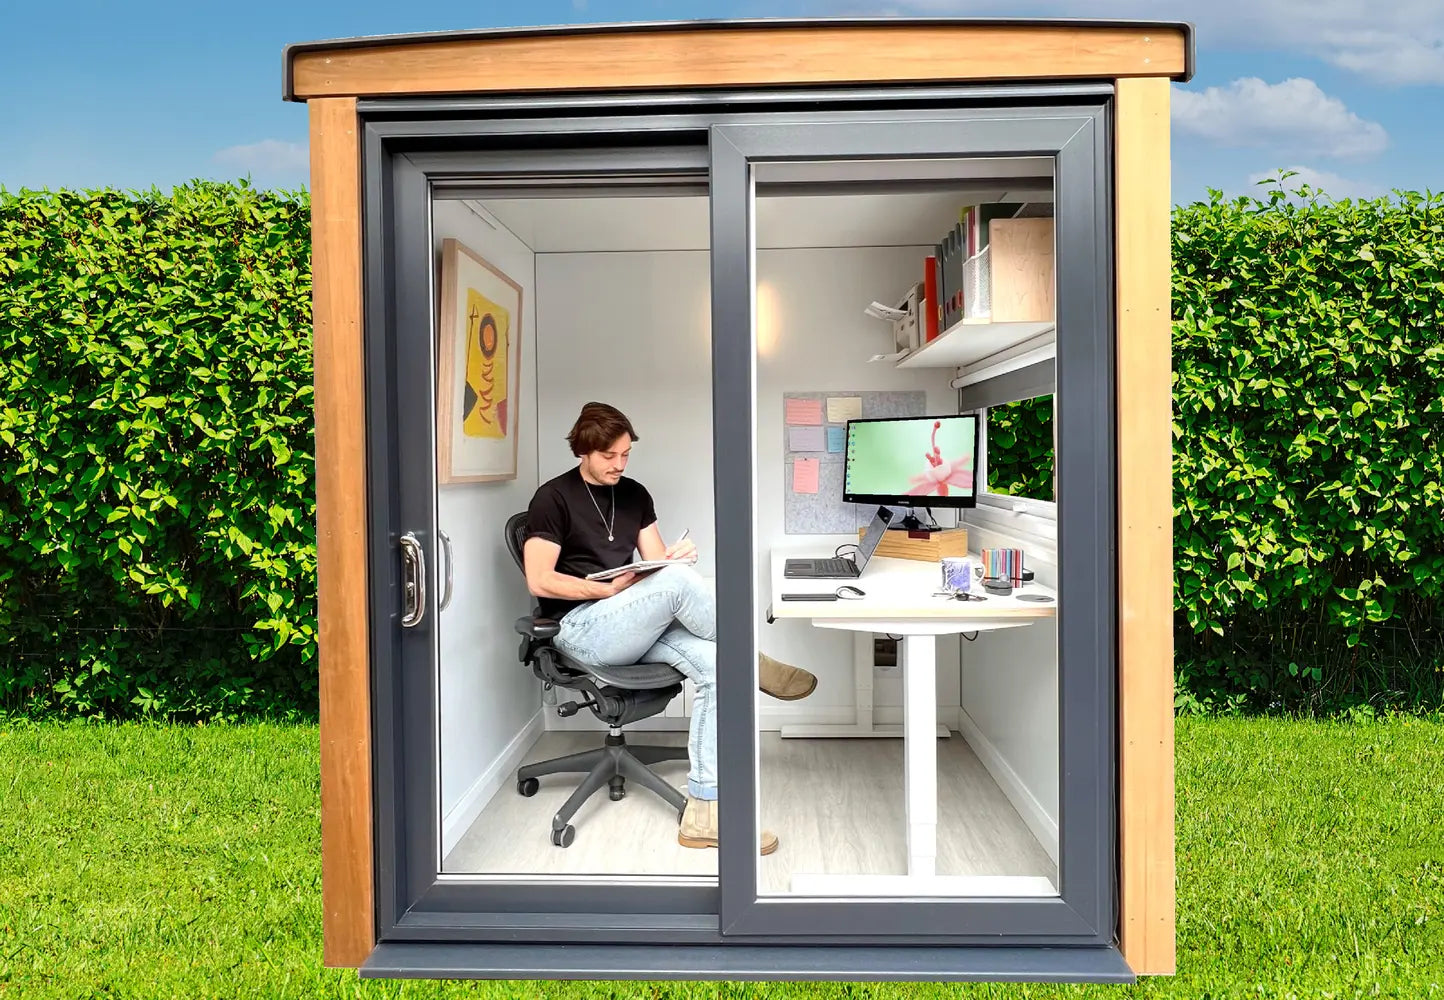 Garden Office 2A, Small office pod situated in a garden. with patio door and window on the right side. Cladding Western Red Cedar. Model sitting in the office pod in an executive chair, table and computer.